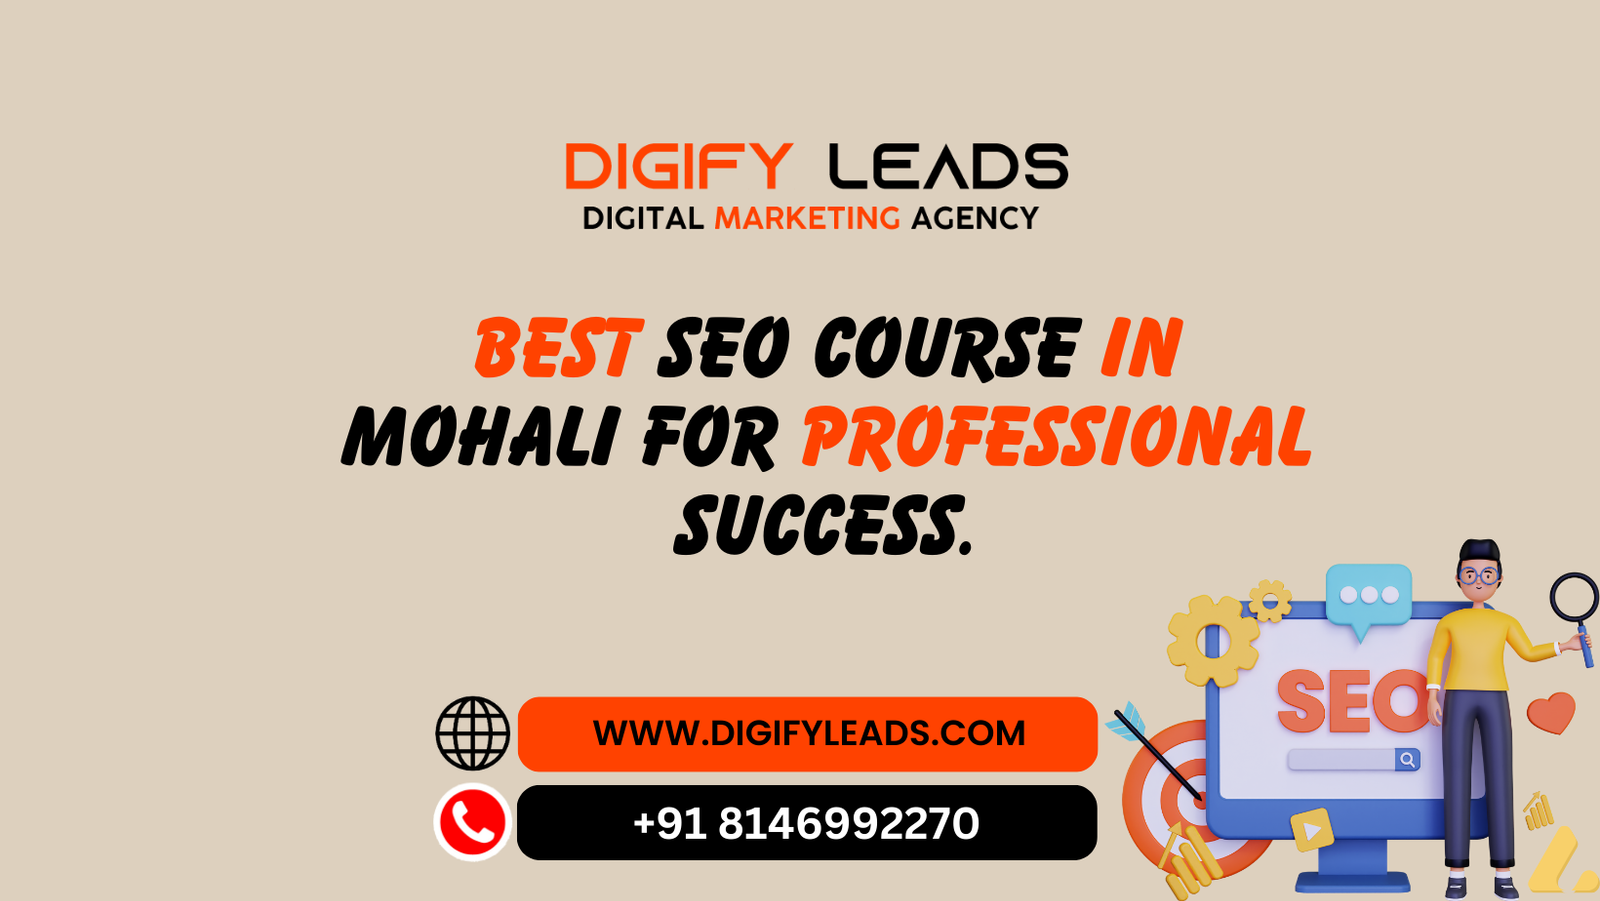 Best SEO course in Mohali for professional success.